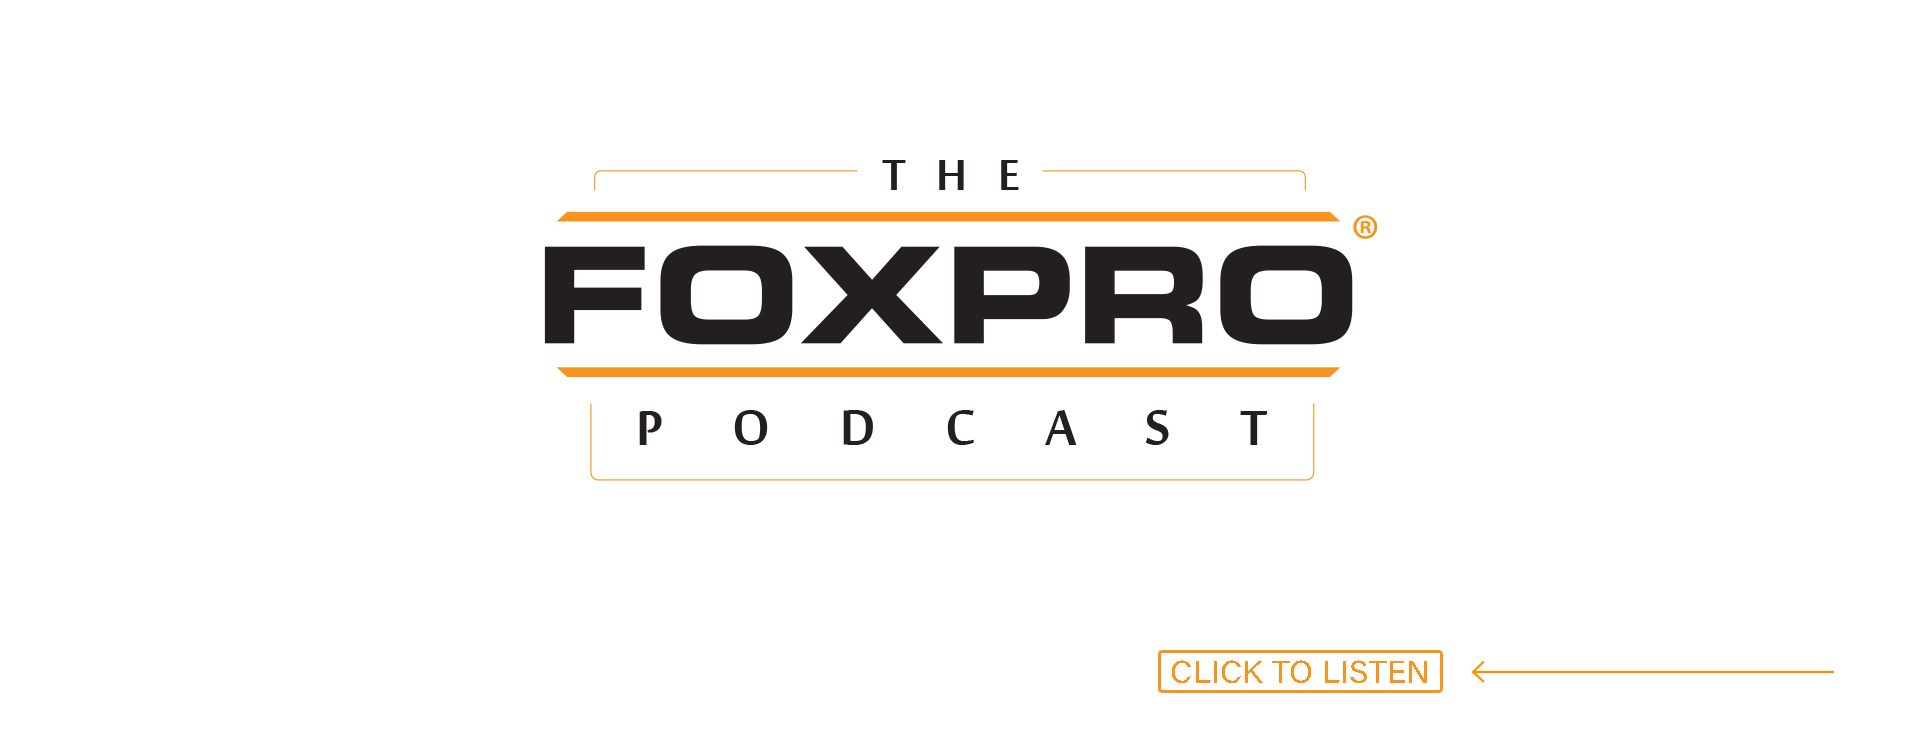 FOXPRO Podcast